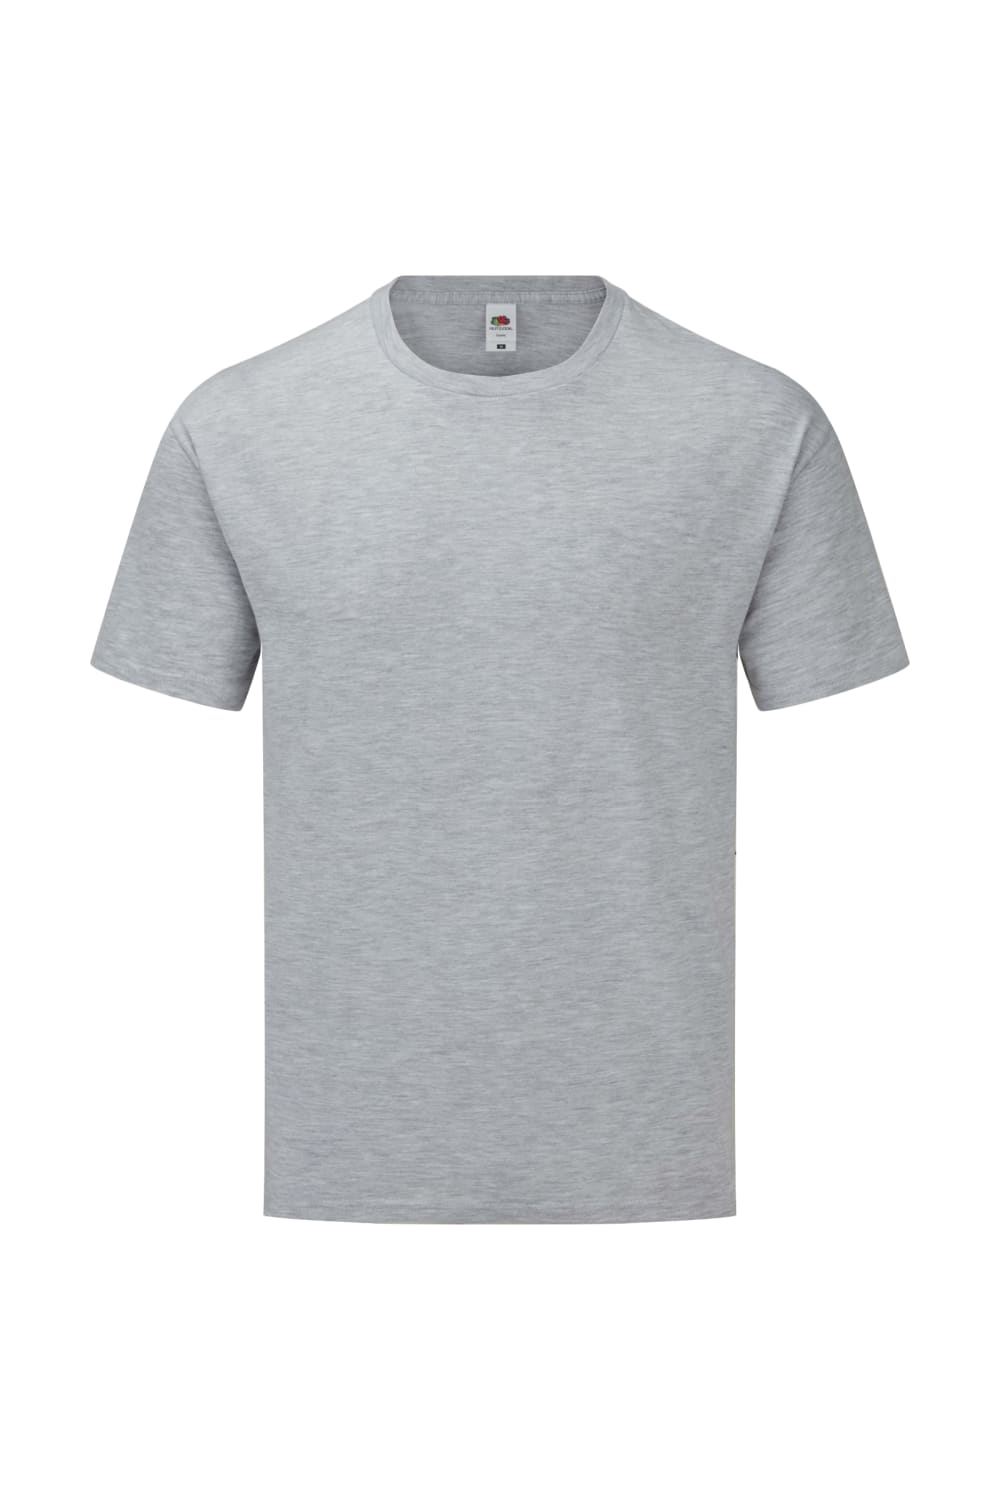 Fruit of the Loom Mens Iconic 165 Classic T-Shirt (Heather Grey)